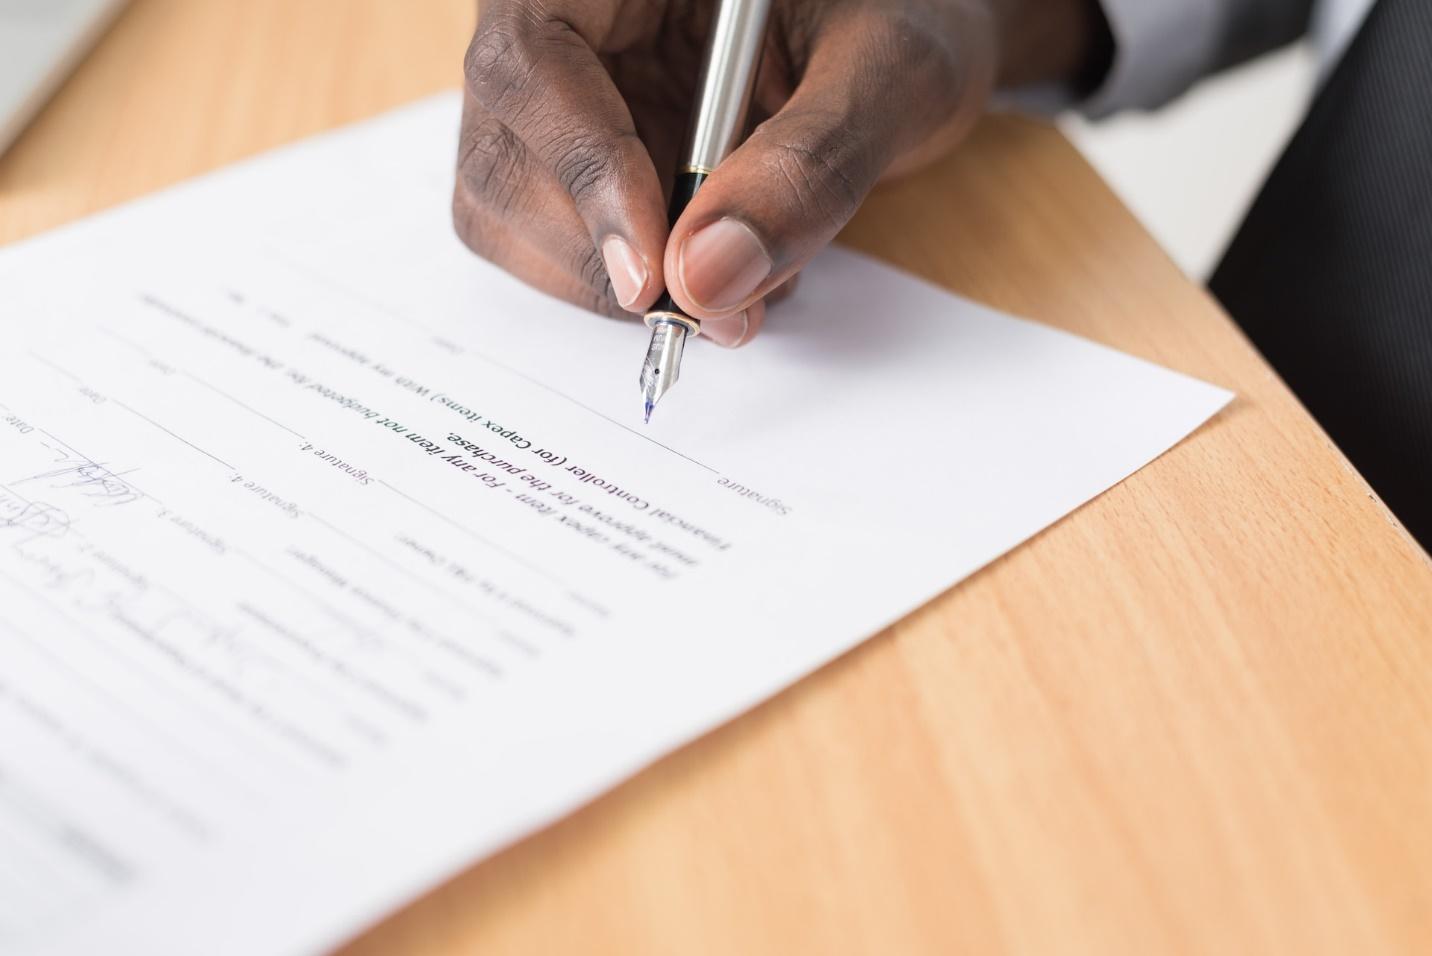 A business person signing a legal document